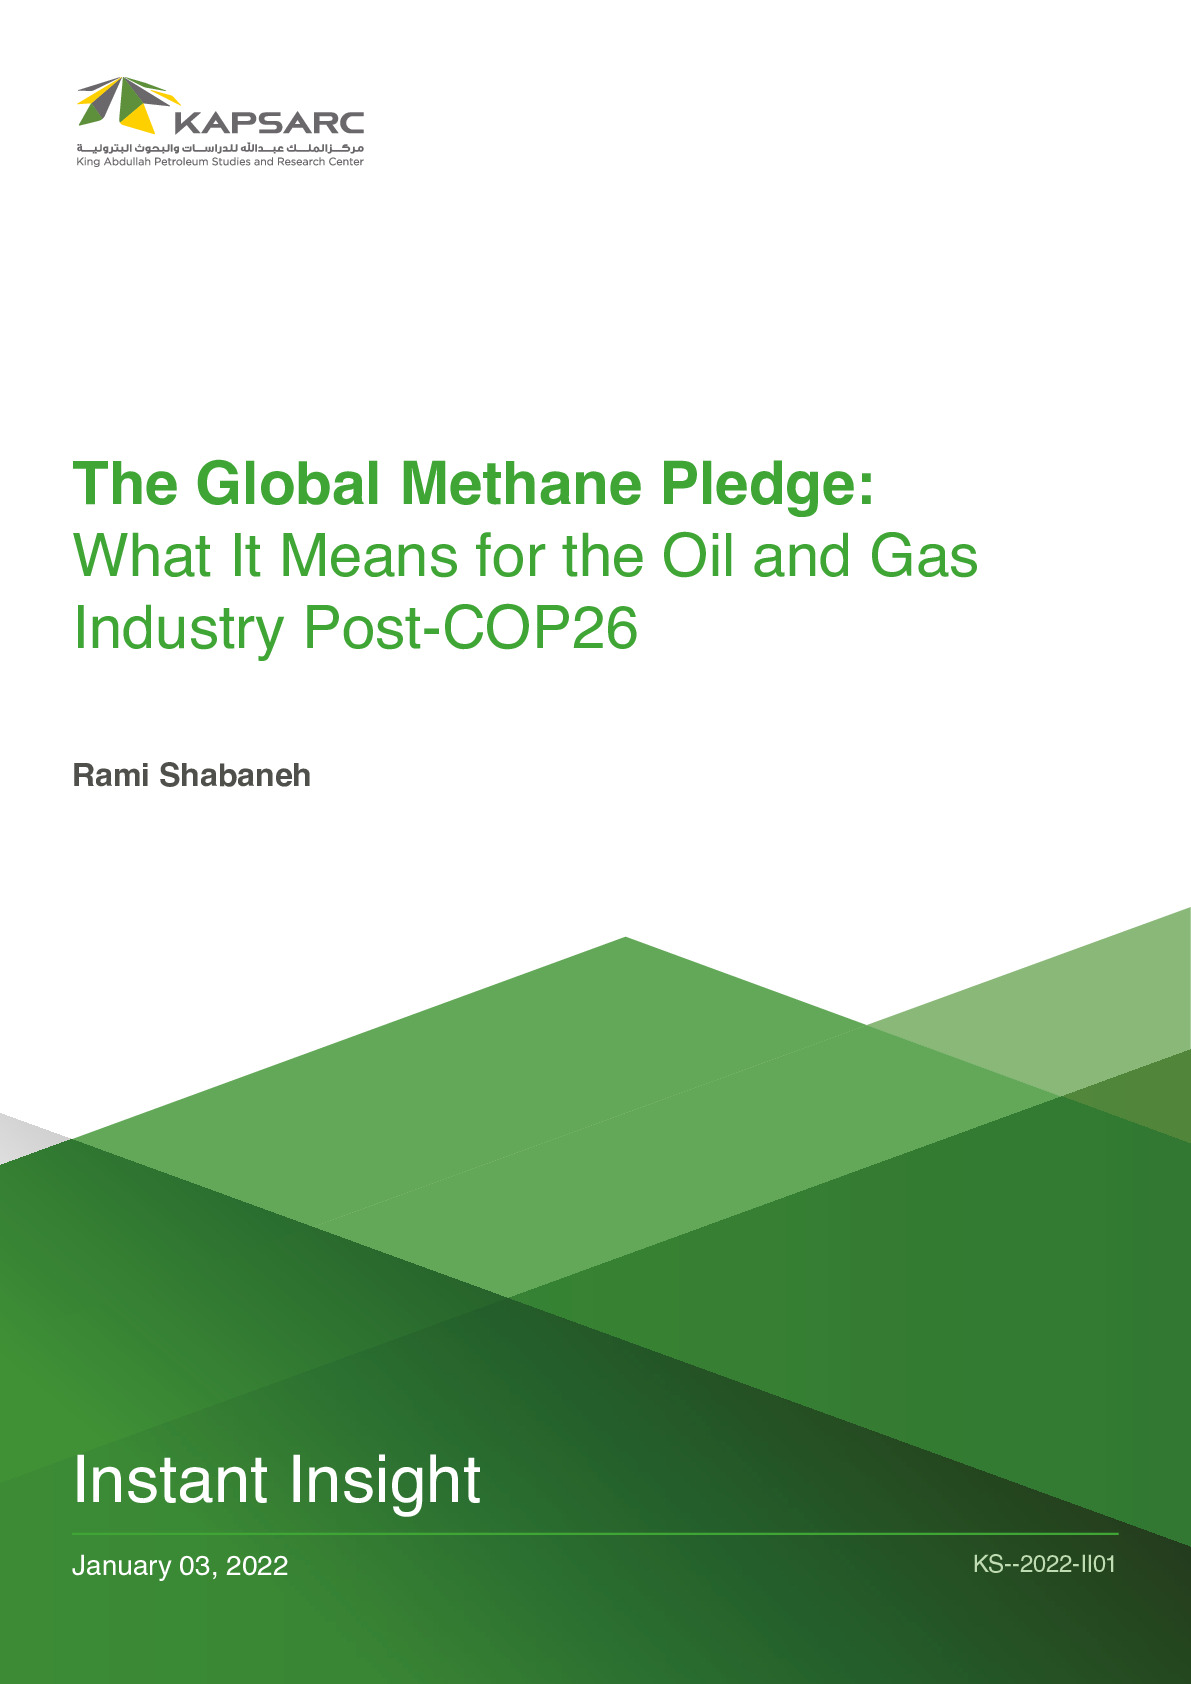 The Global Methane Pledge: What It Means for the Oil and Gas Industry Post-COP26